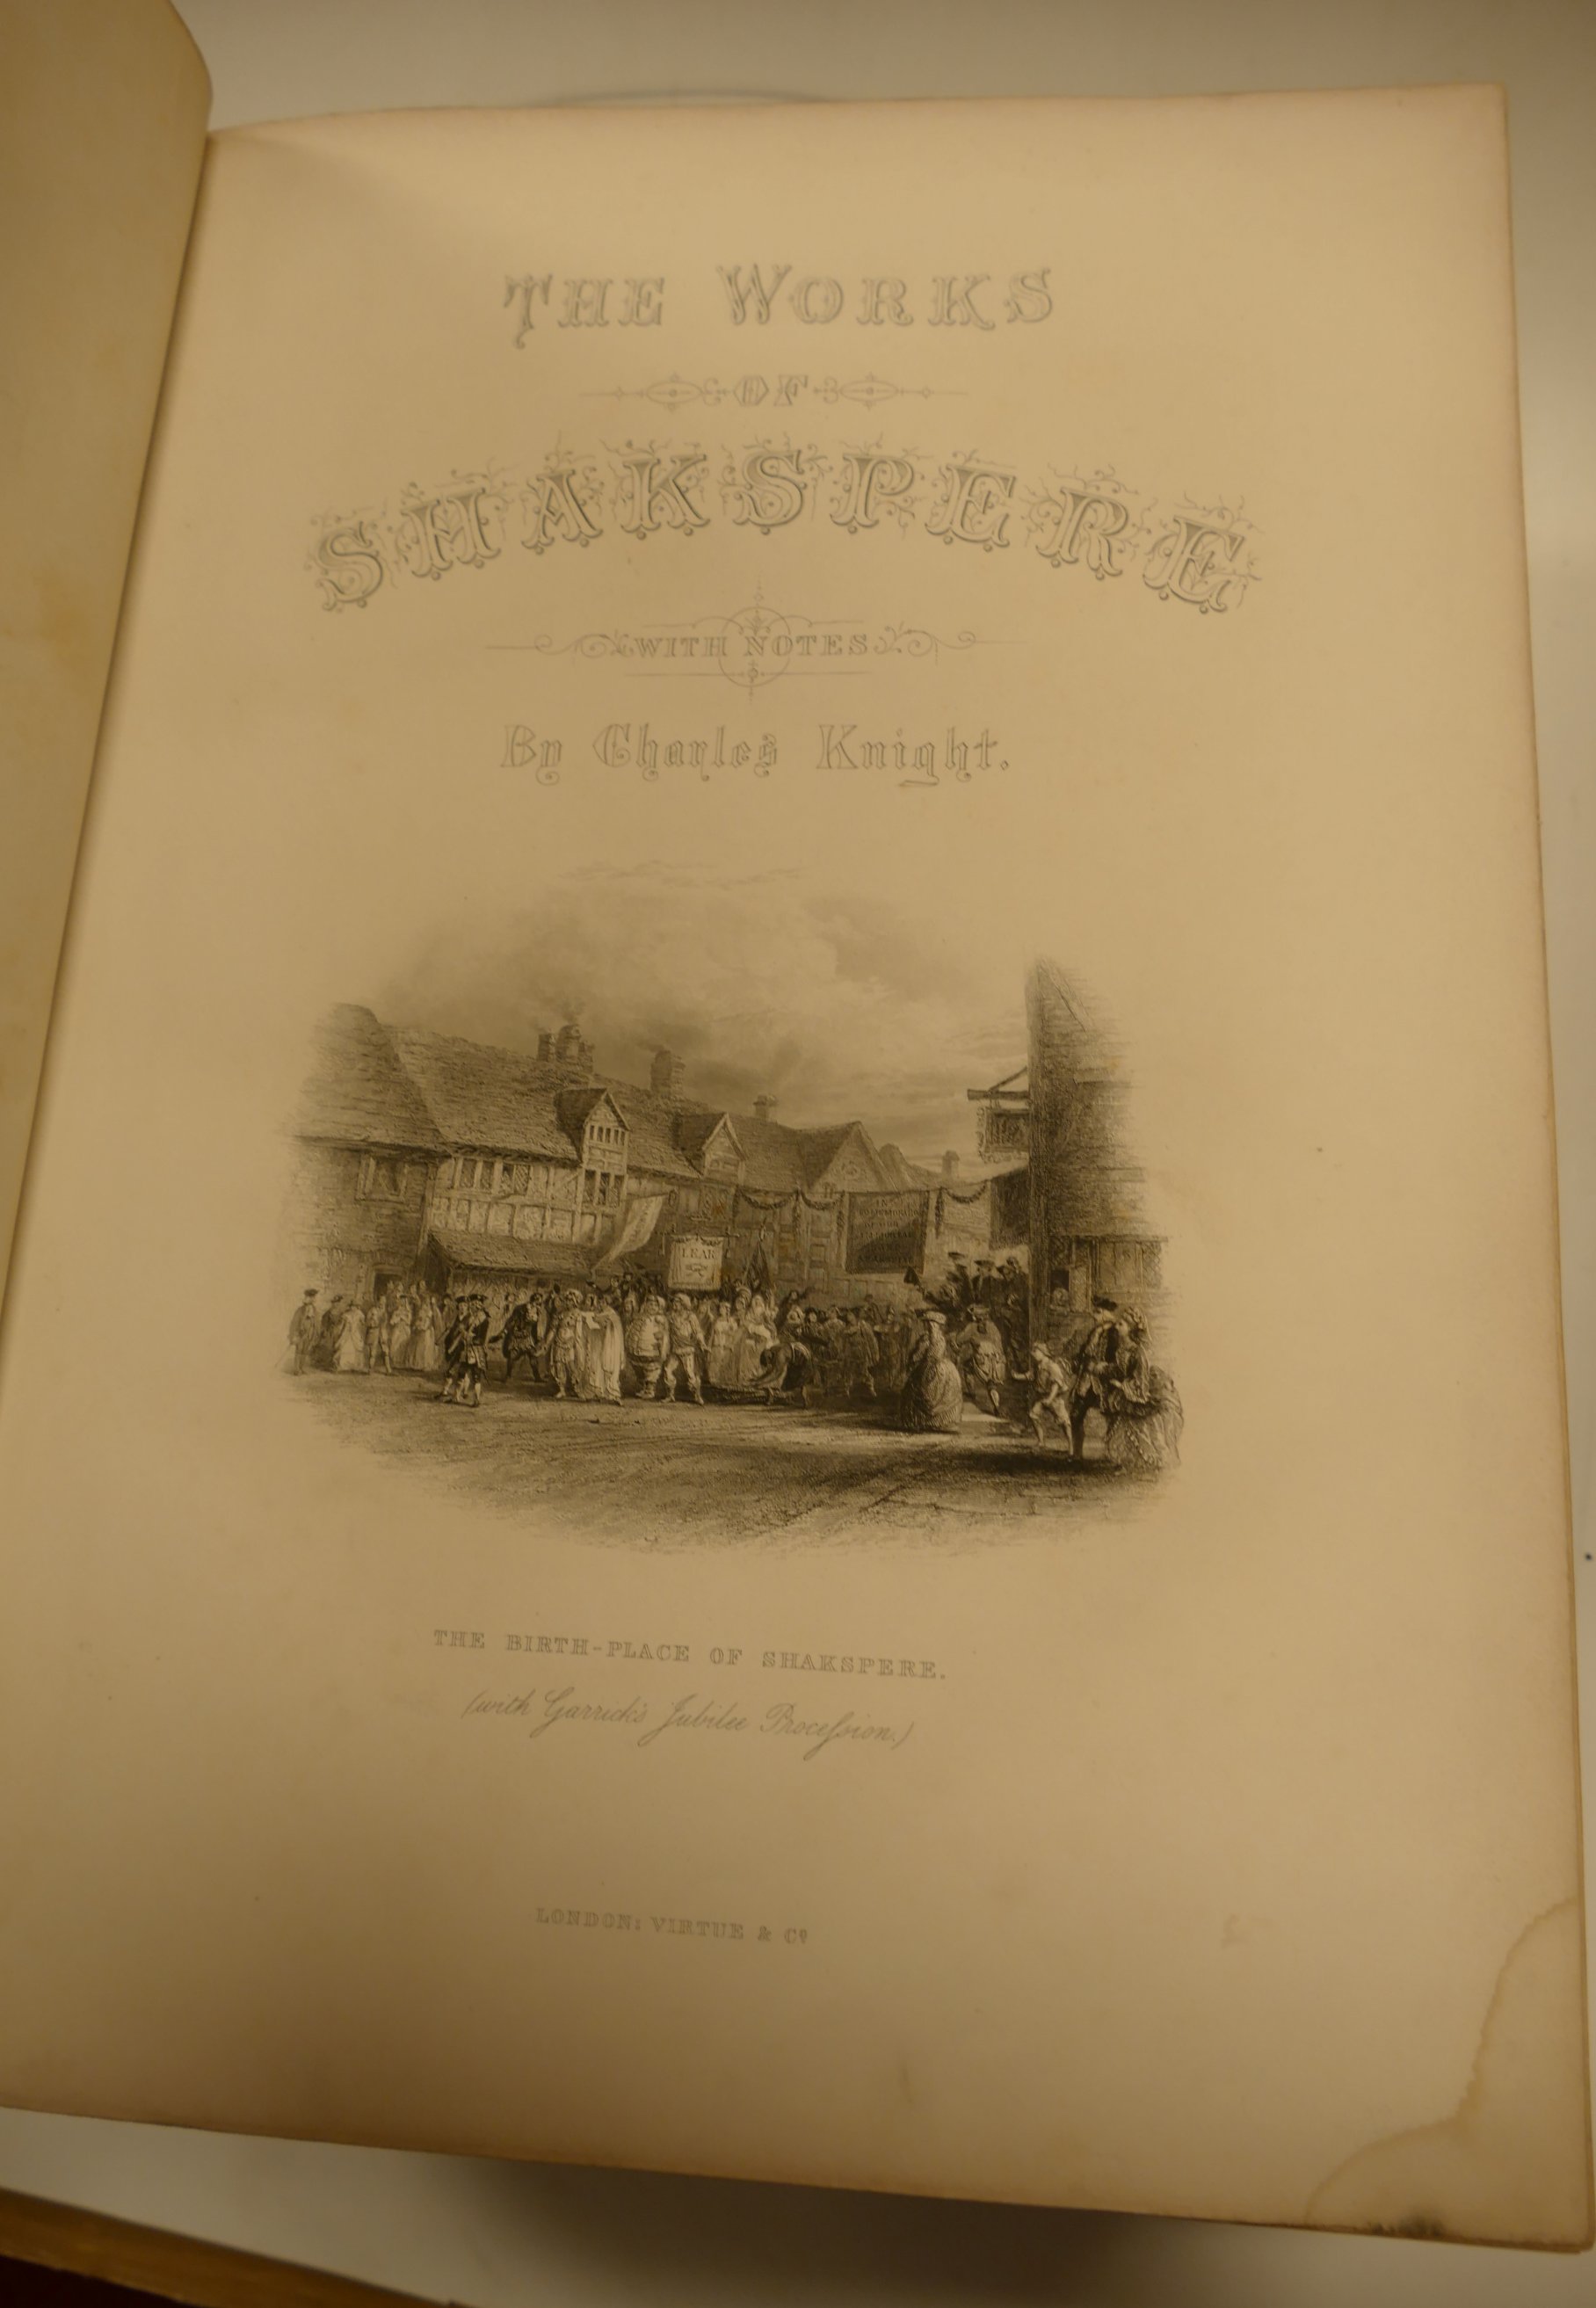 SHAKESPEARE, William, Works, London n.d. - Image 3 of 4